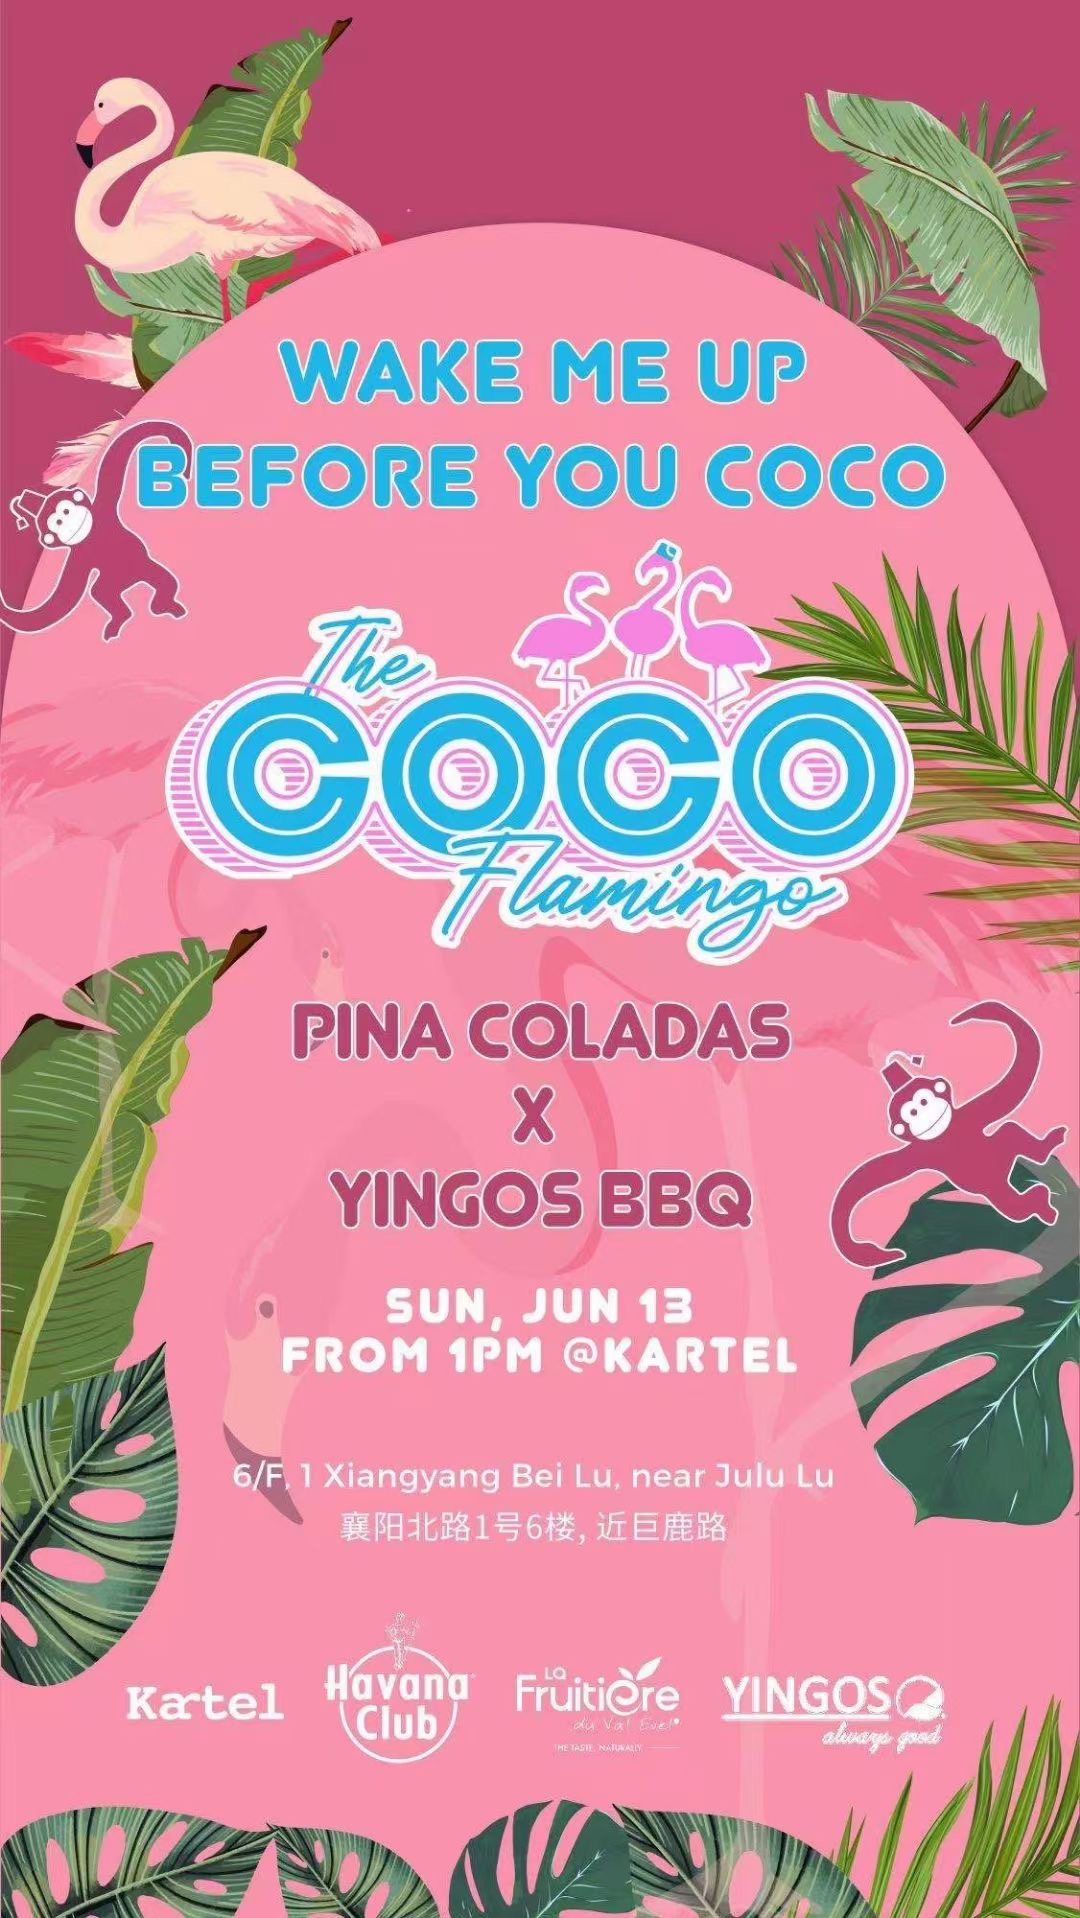 Before you coco | Shanghai Events